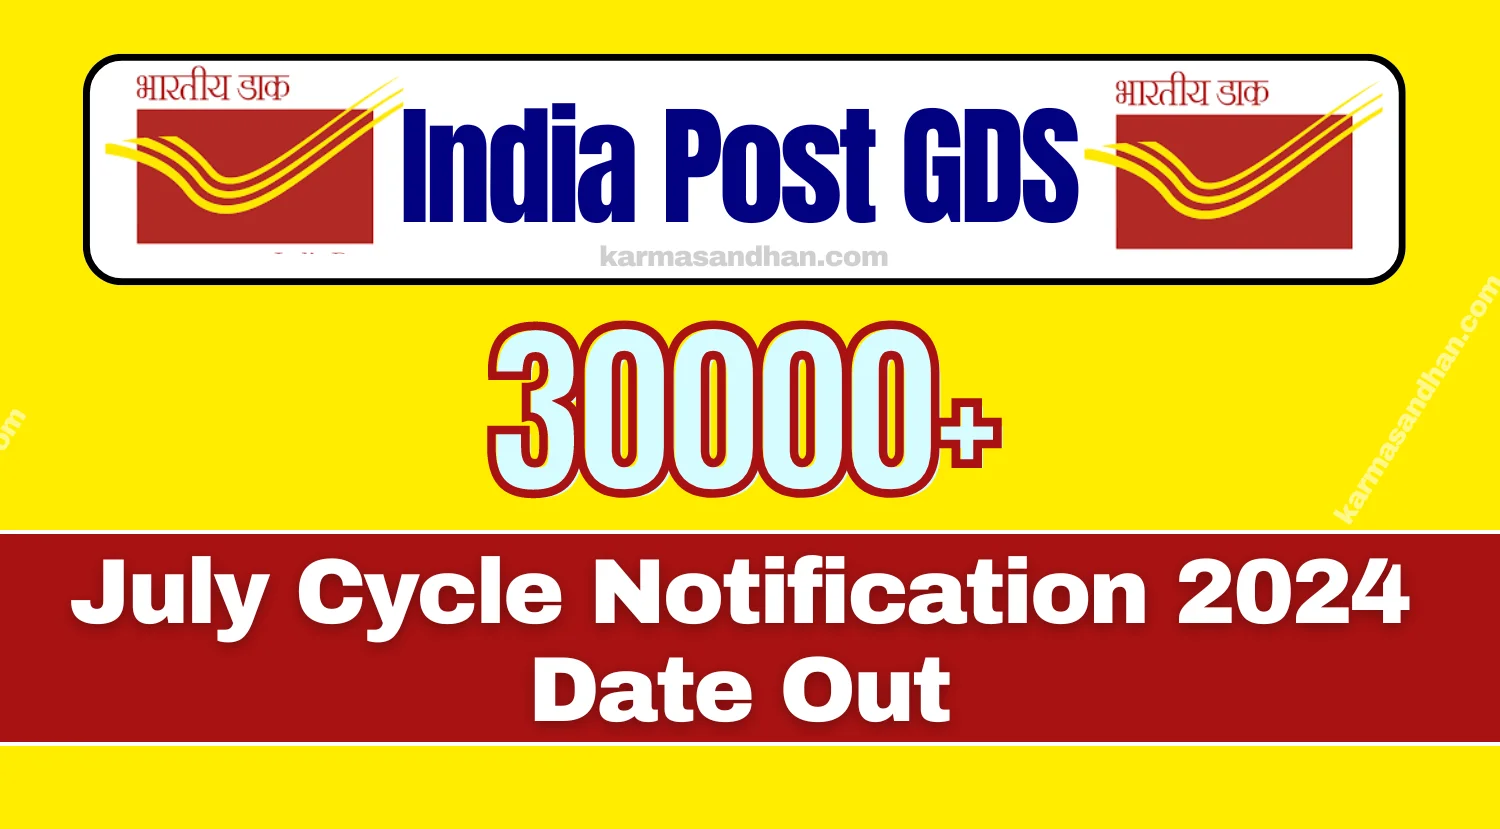 India Post GDS Recruitment 2024 Notification Date for July Cycle Released, Vacancies Aprox 30,000+